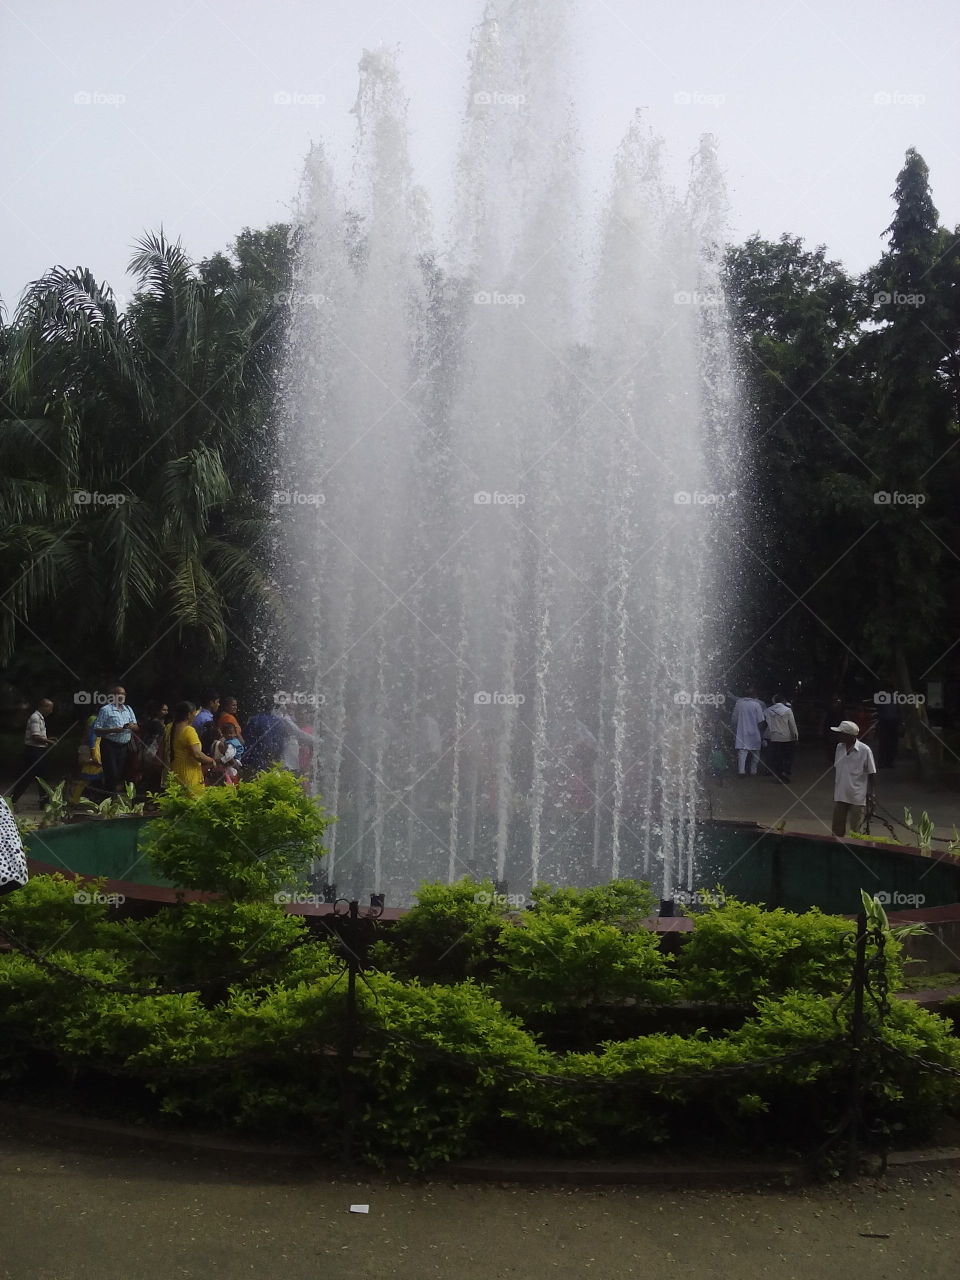 Fountain
water
Social
gathering
people
park
recreational